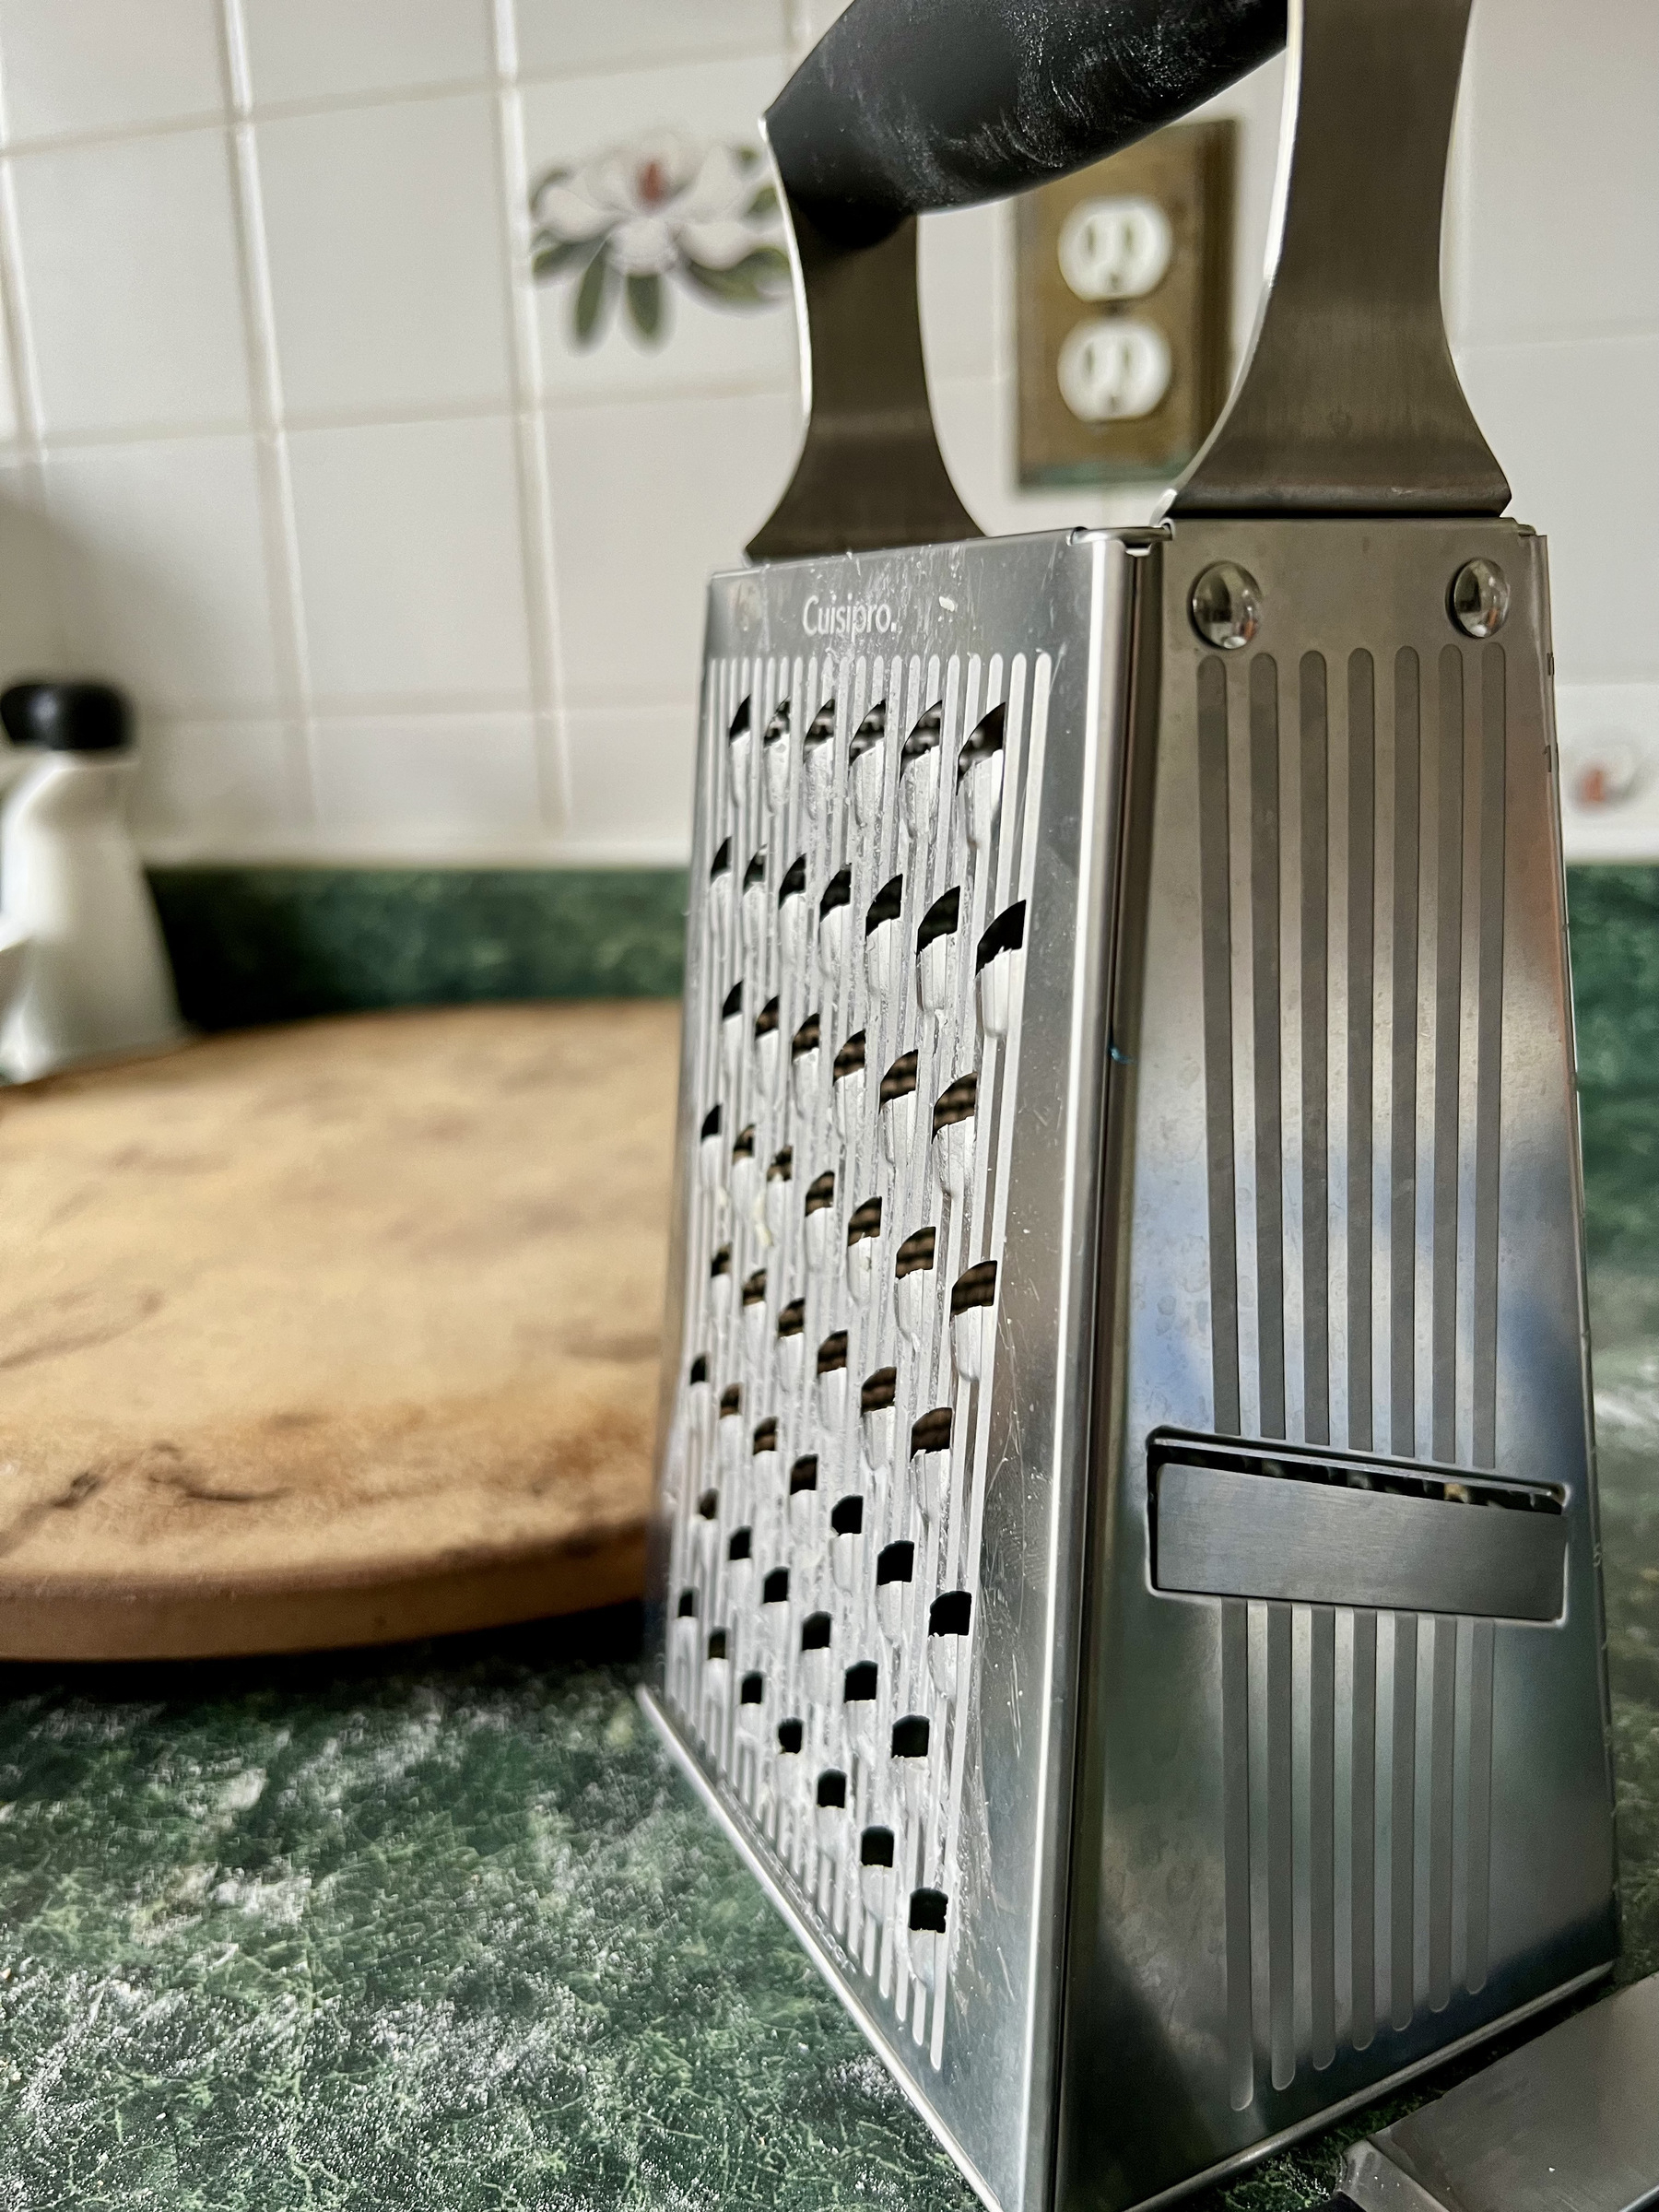 Cheese grater on countertop with pizza stone in background